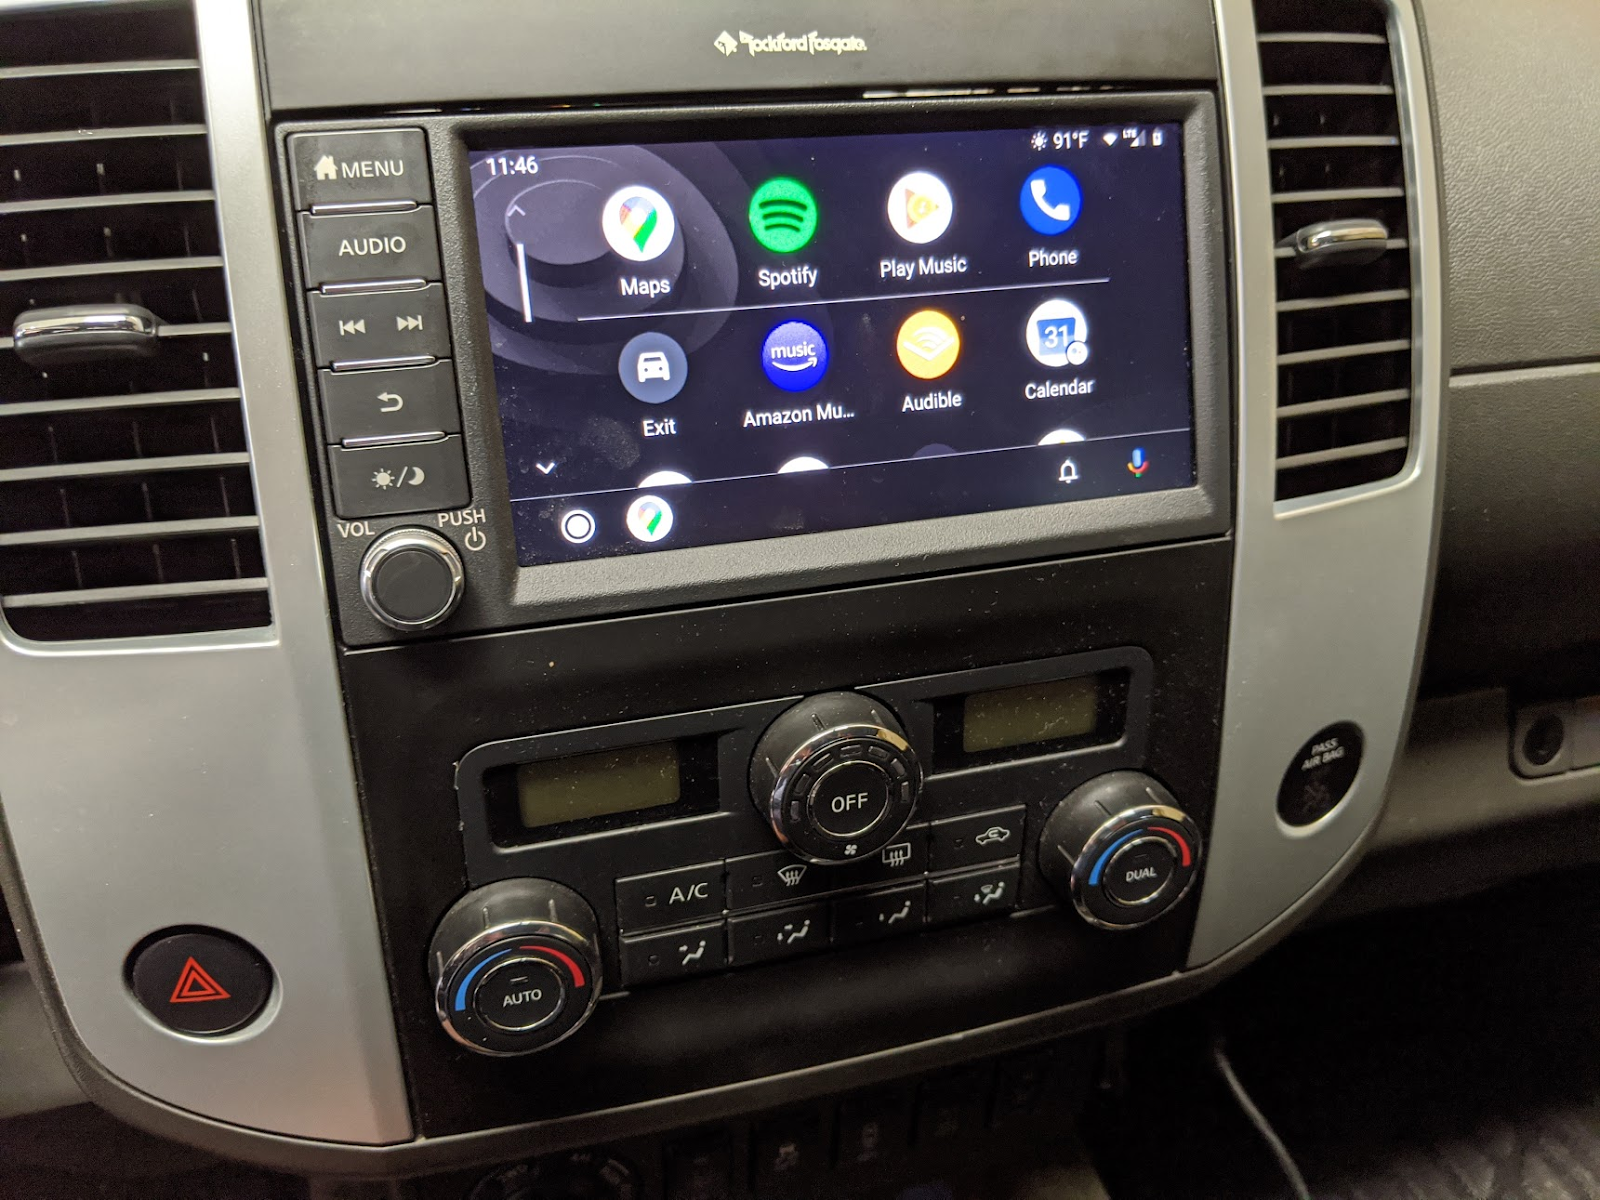 Factory Nissan Android Auto / Apple CarPlay Mod Completed | Nissan Frontier  Forum